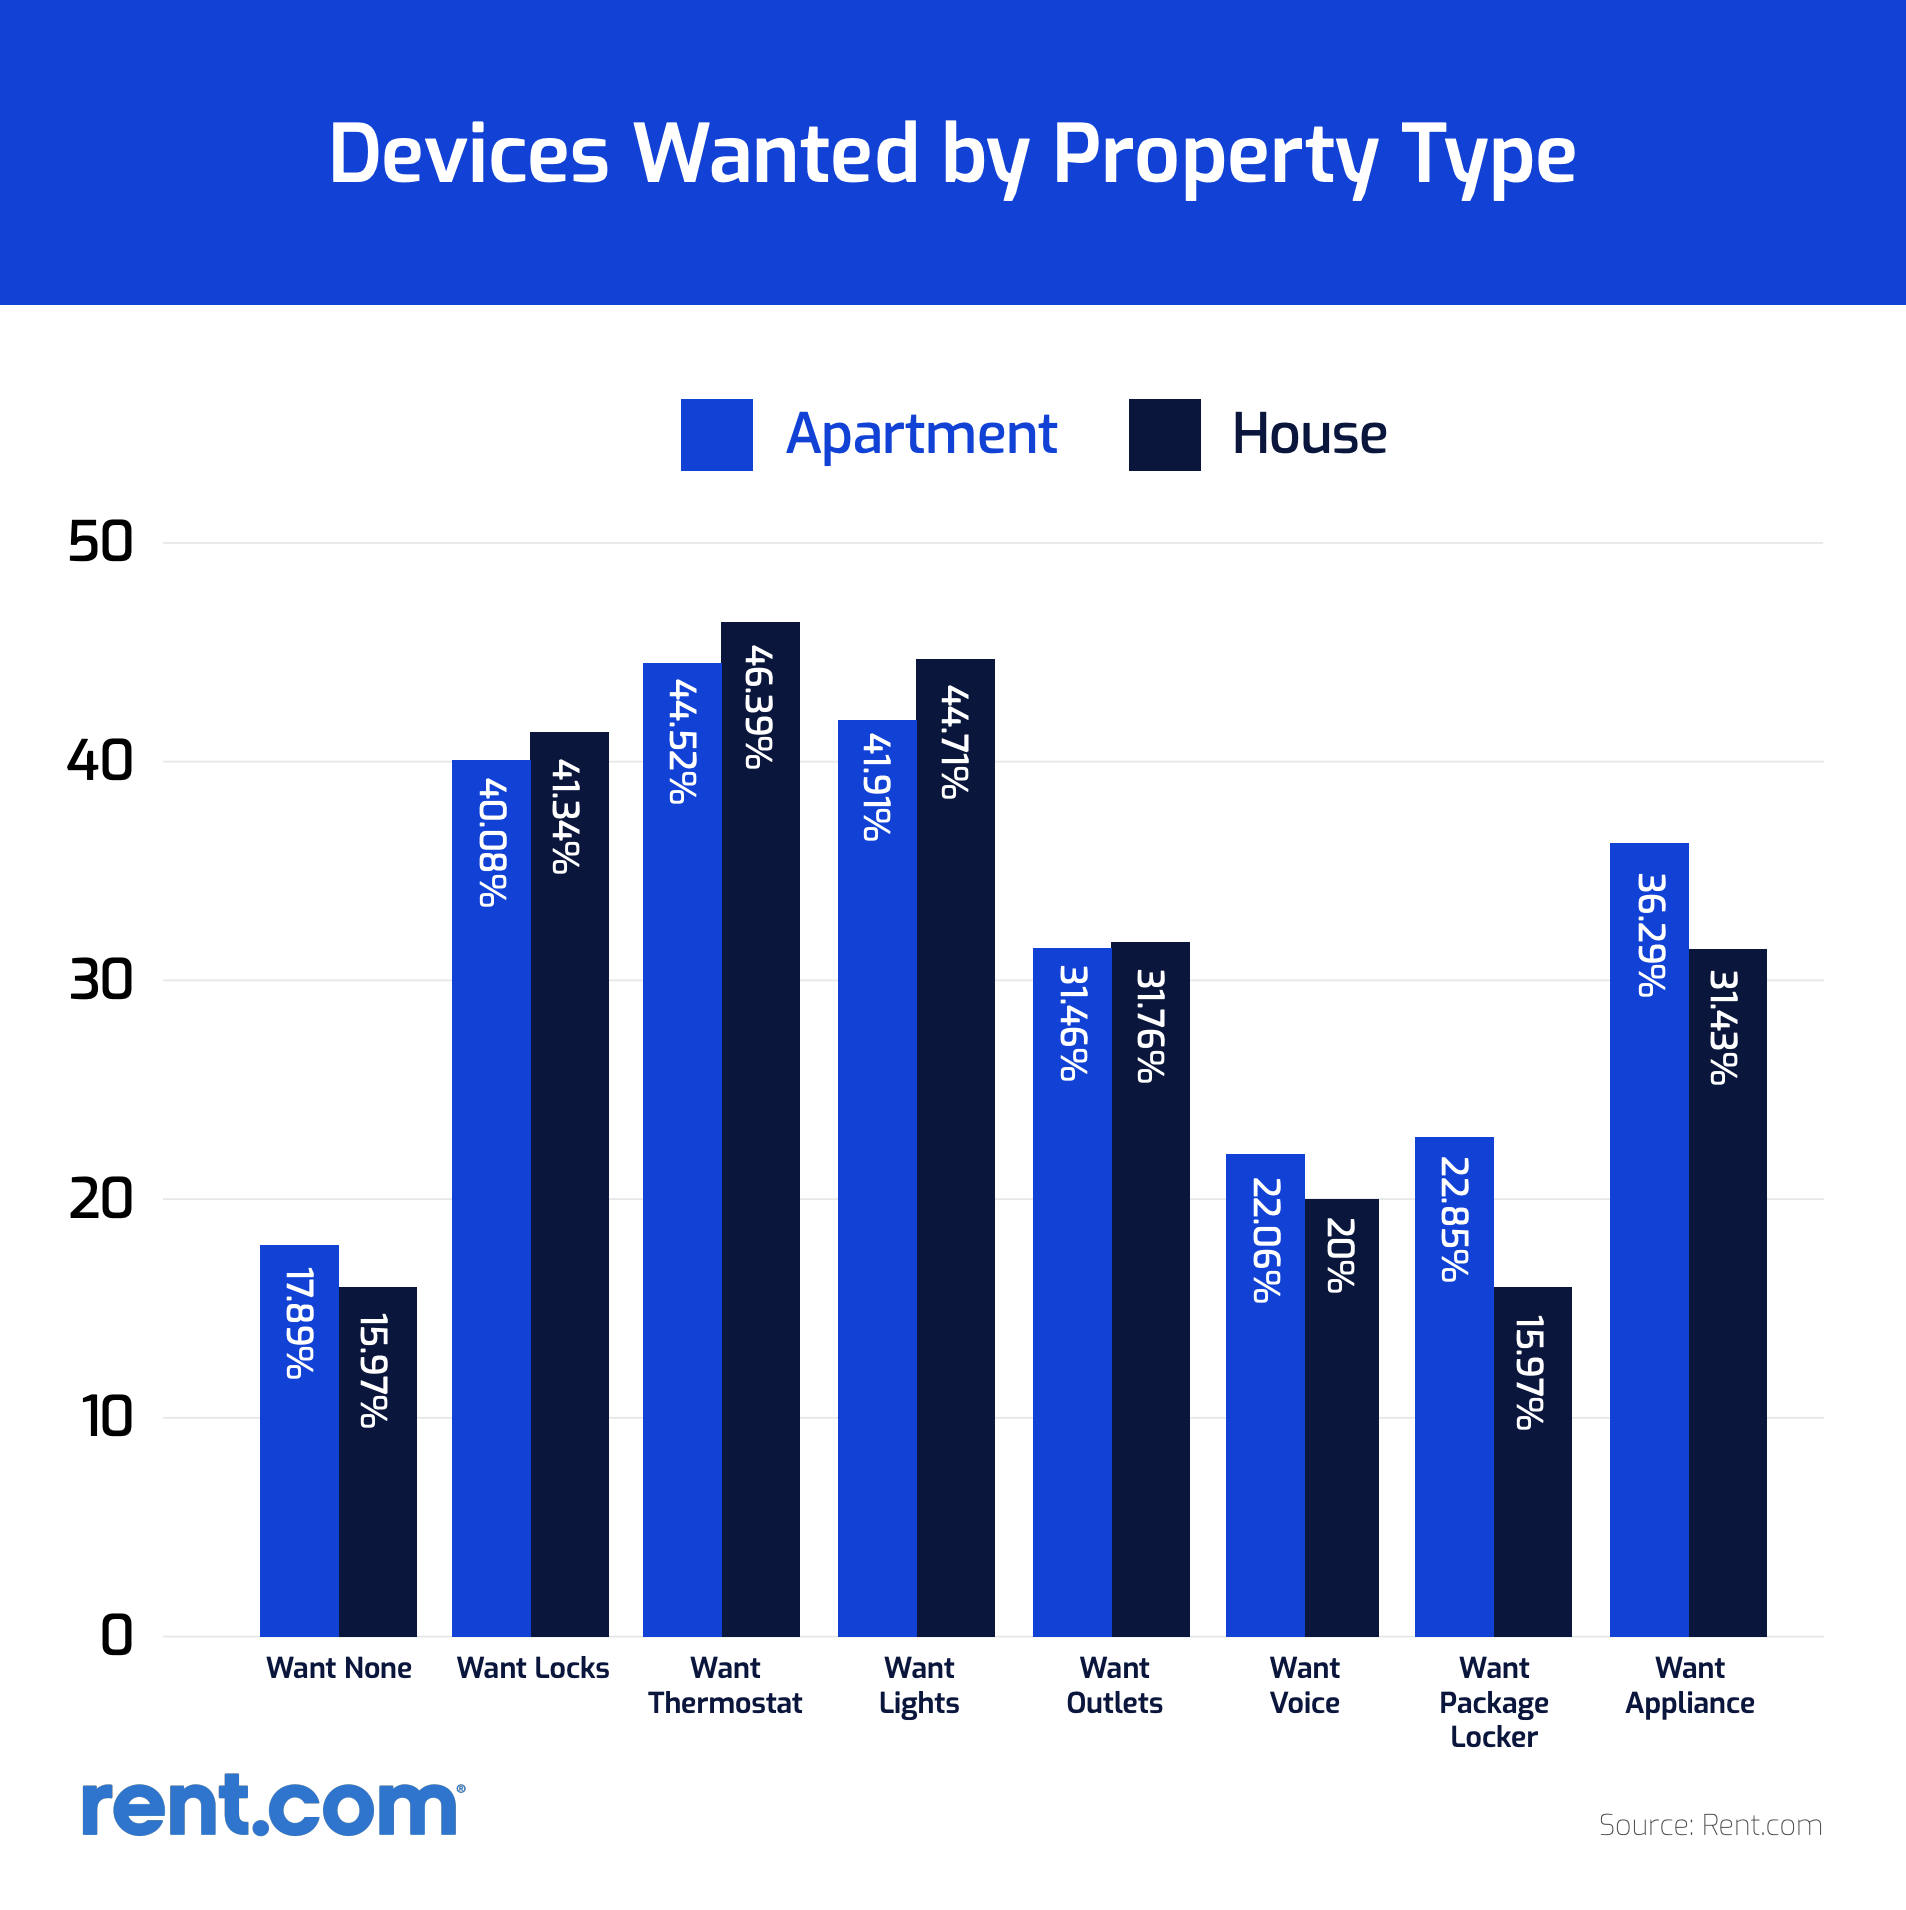 Rent.com survey on smart home tech devices wanted by property type